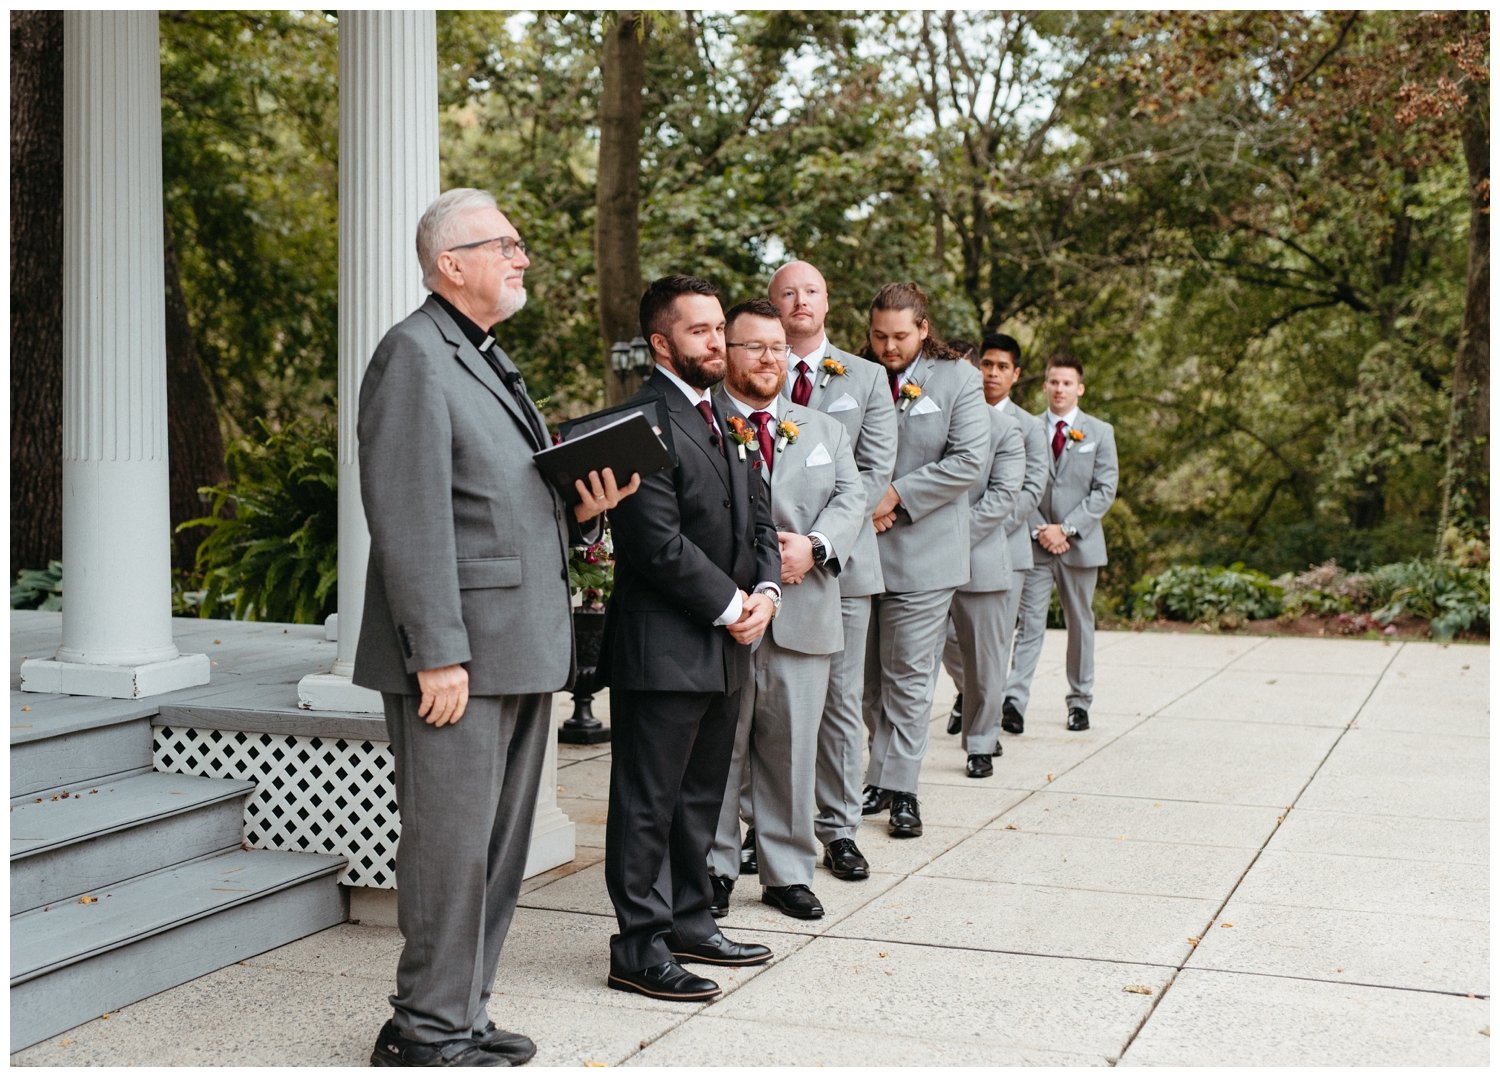 The groom and groomsmen stand in a line wearing gray suits at the intimate destination wedding